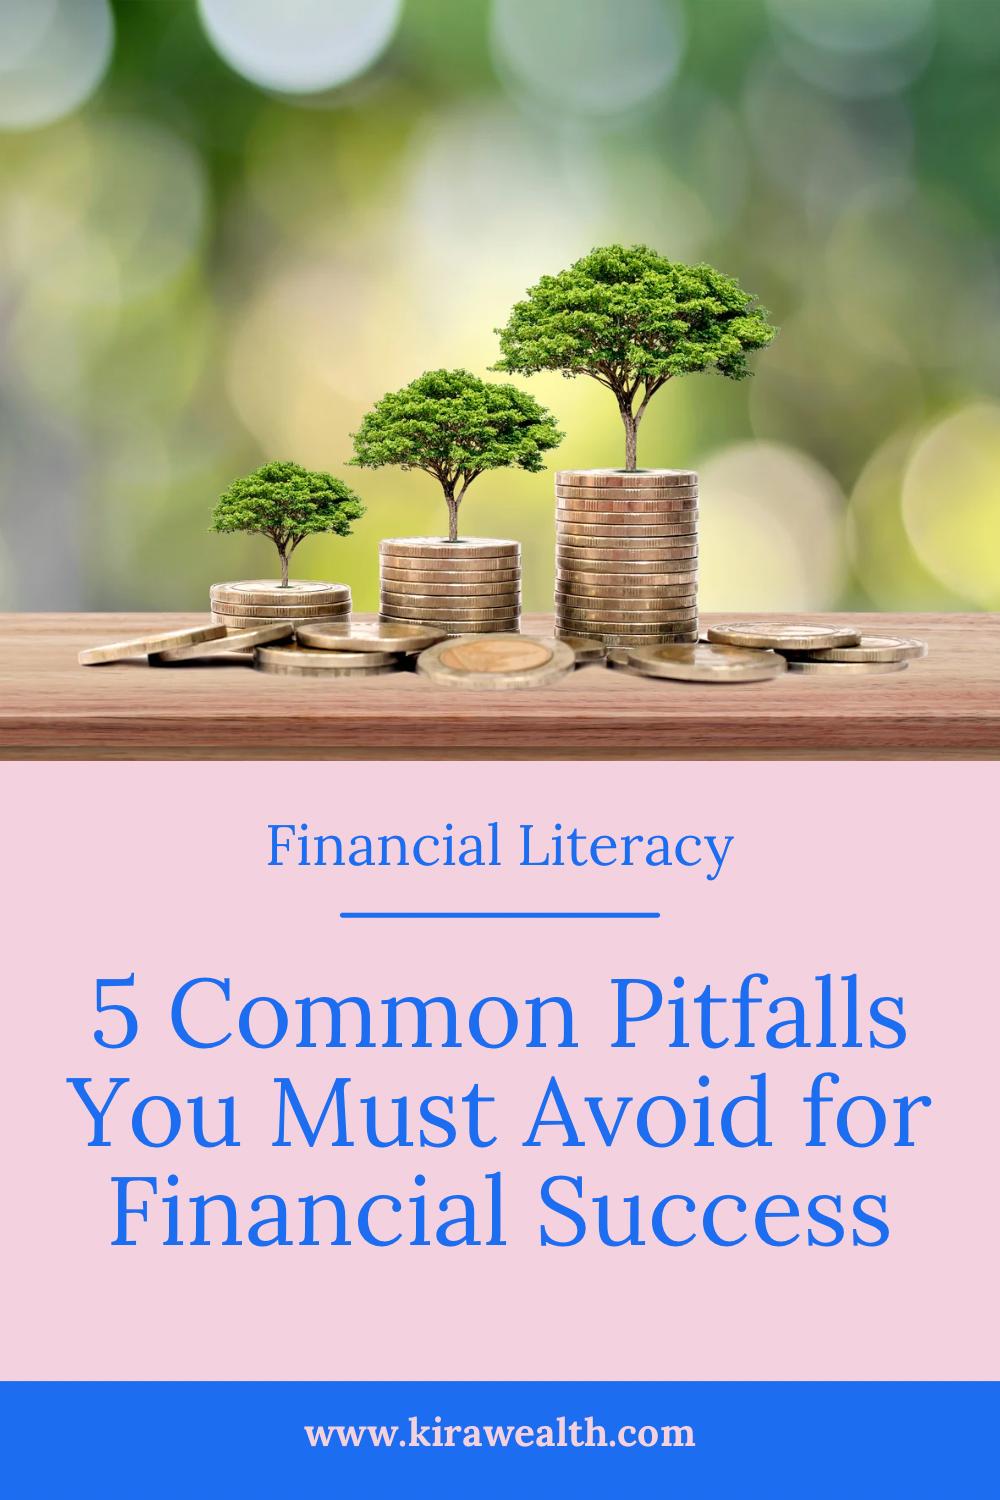 Financial literacy 5 common pitfalls you must avoid for financial success